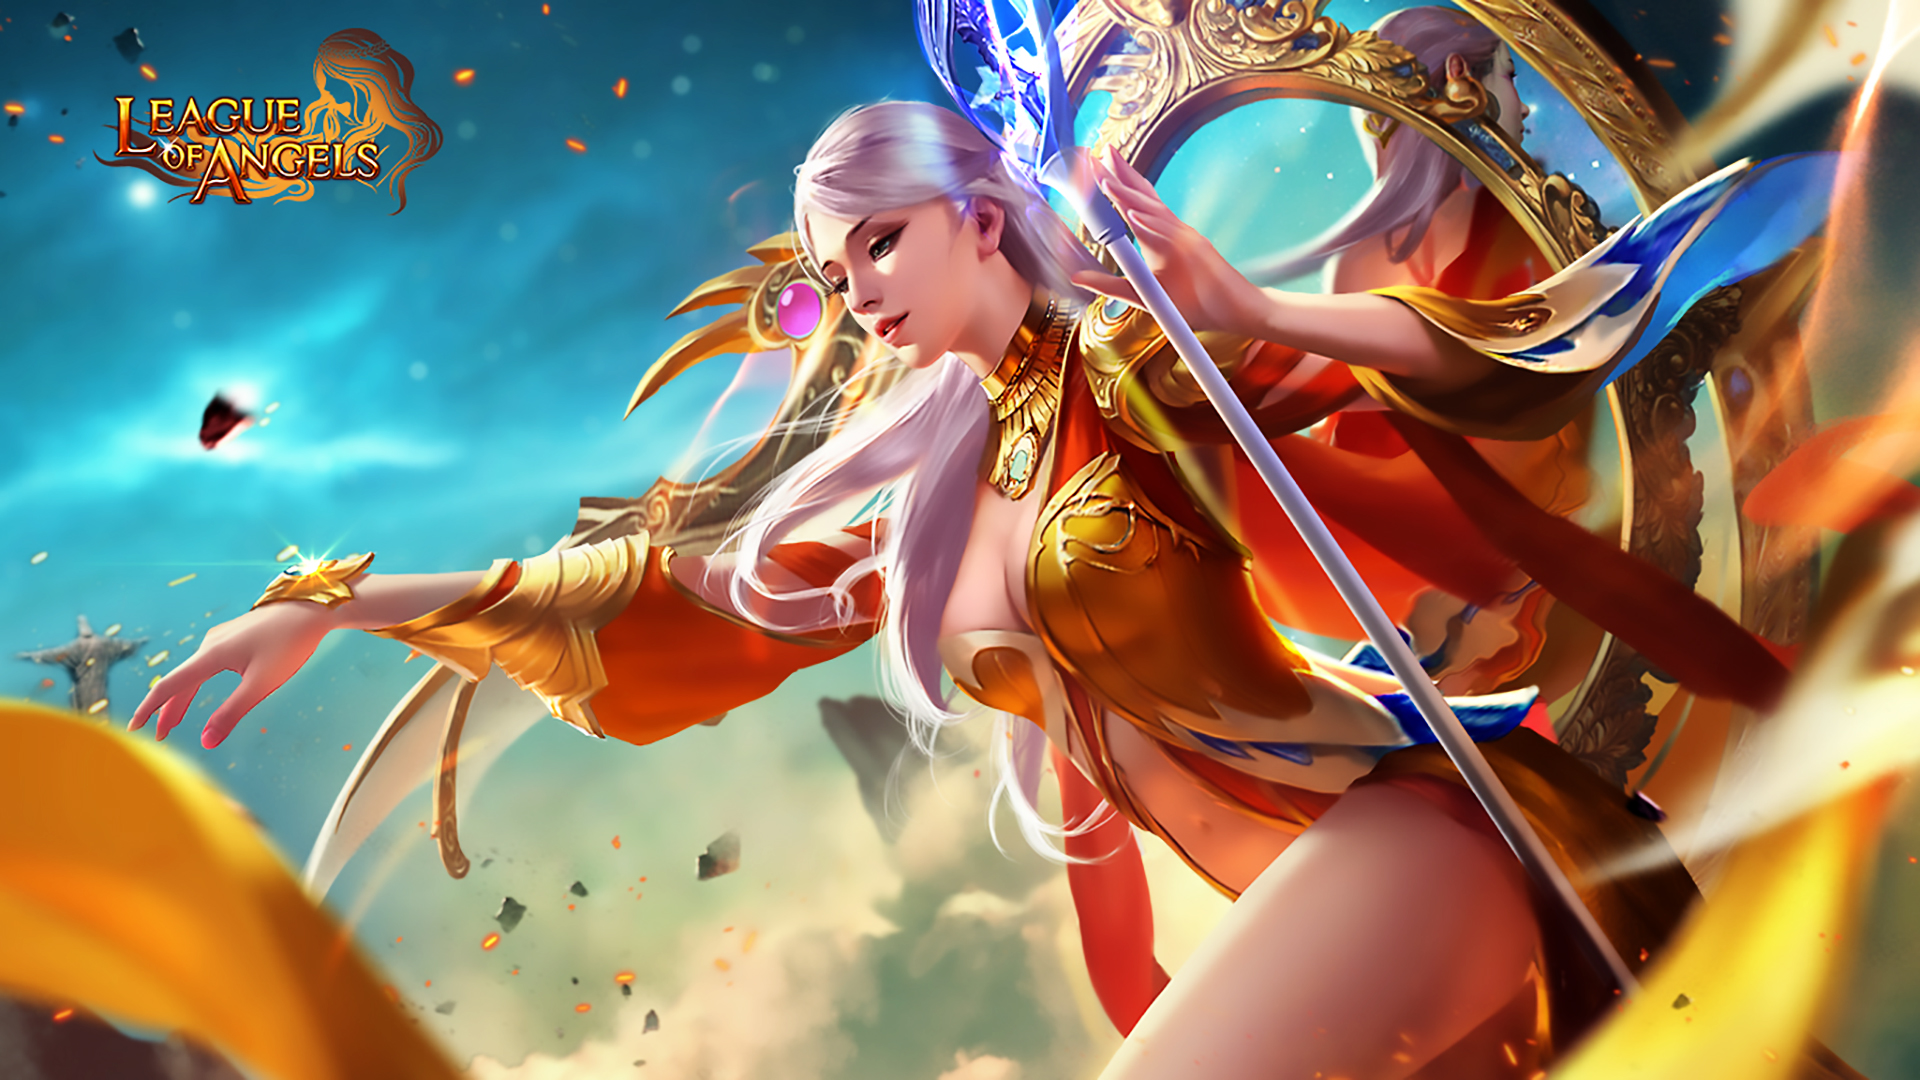 League of Angels Wallpaper 039 - Elianna Wallpapers @ Ethere